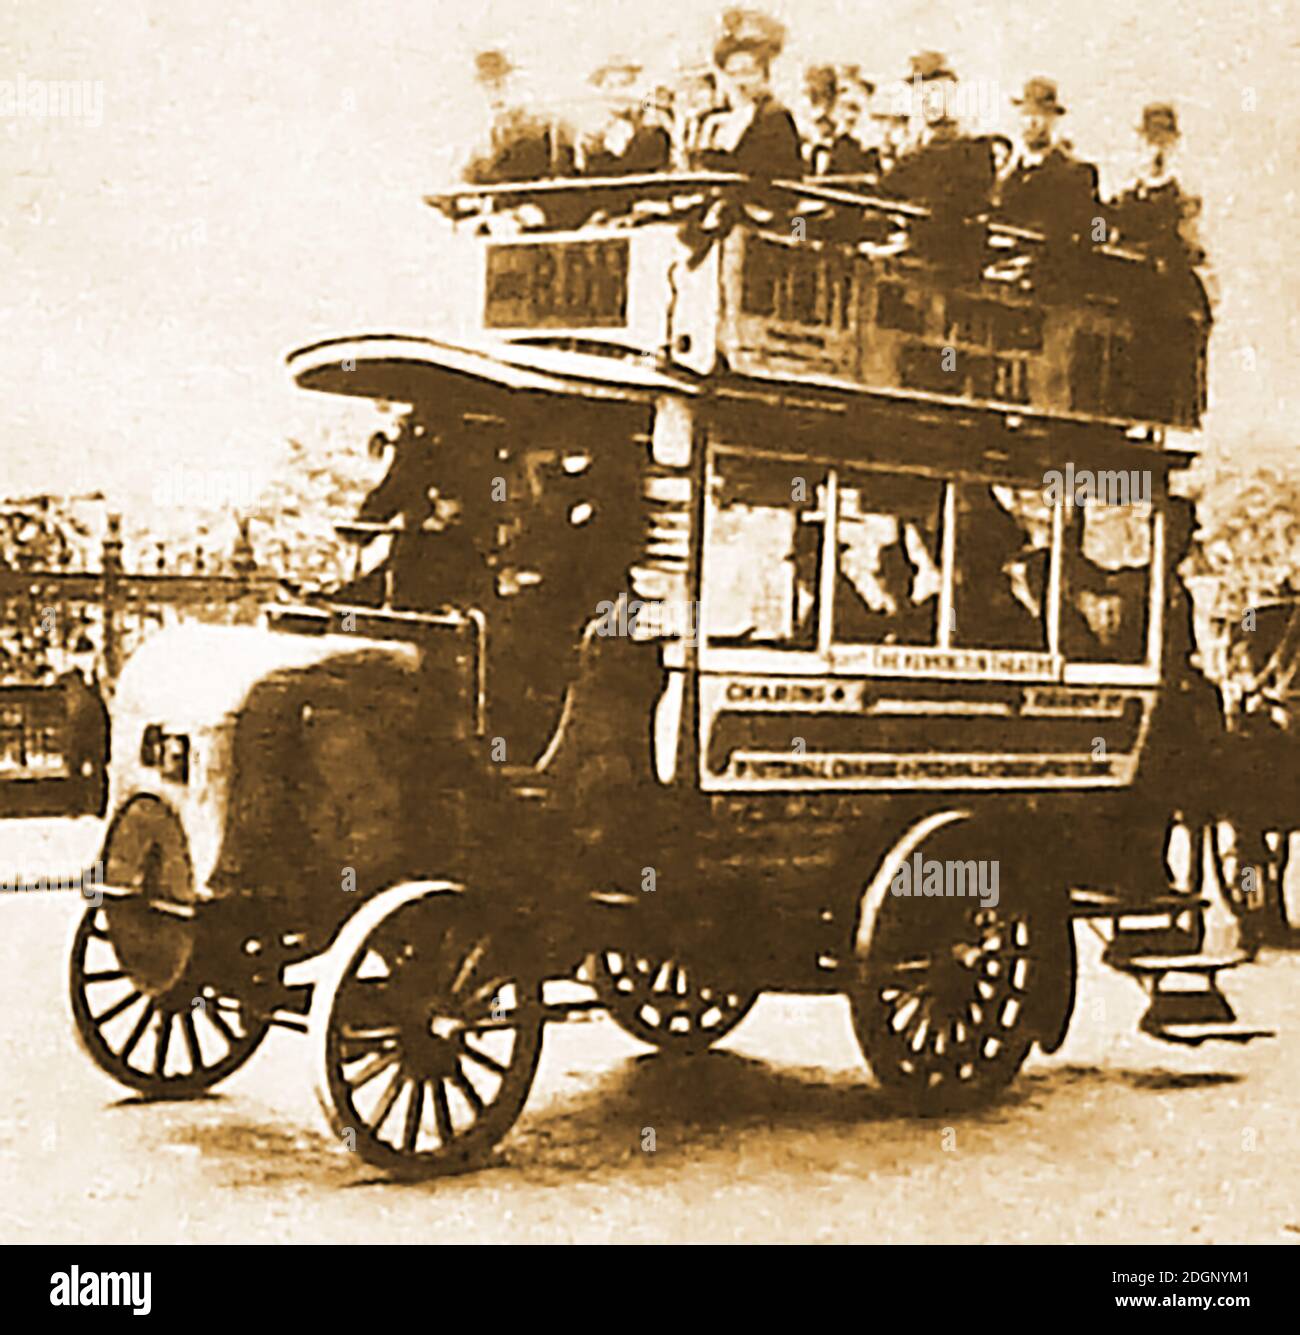 1899 photograph of the first Lawson type motor bus put into service in London. In 1855 the London General Omnibus Company  was founded to amalgamate and regulate all horse-drawn omnibus services  operating in London but began manufacturing and operating motor vehicles from 1909 onwards. Stock Photo